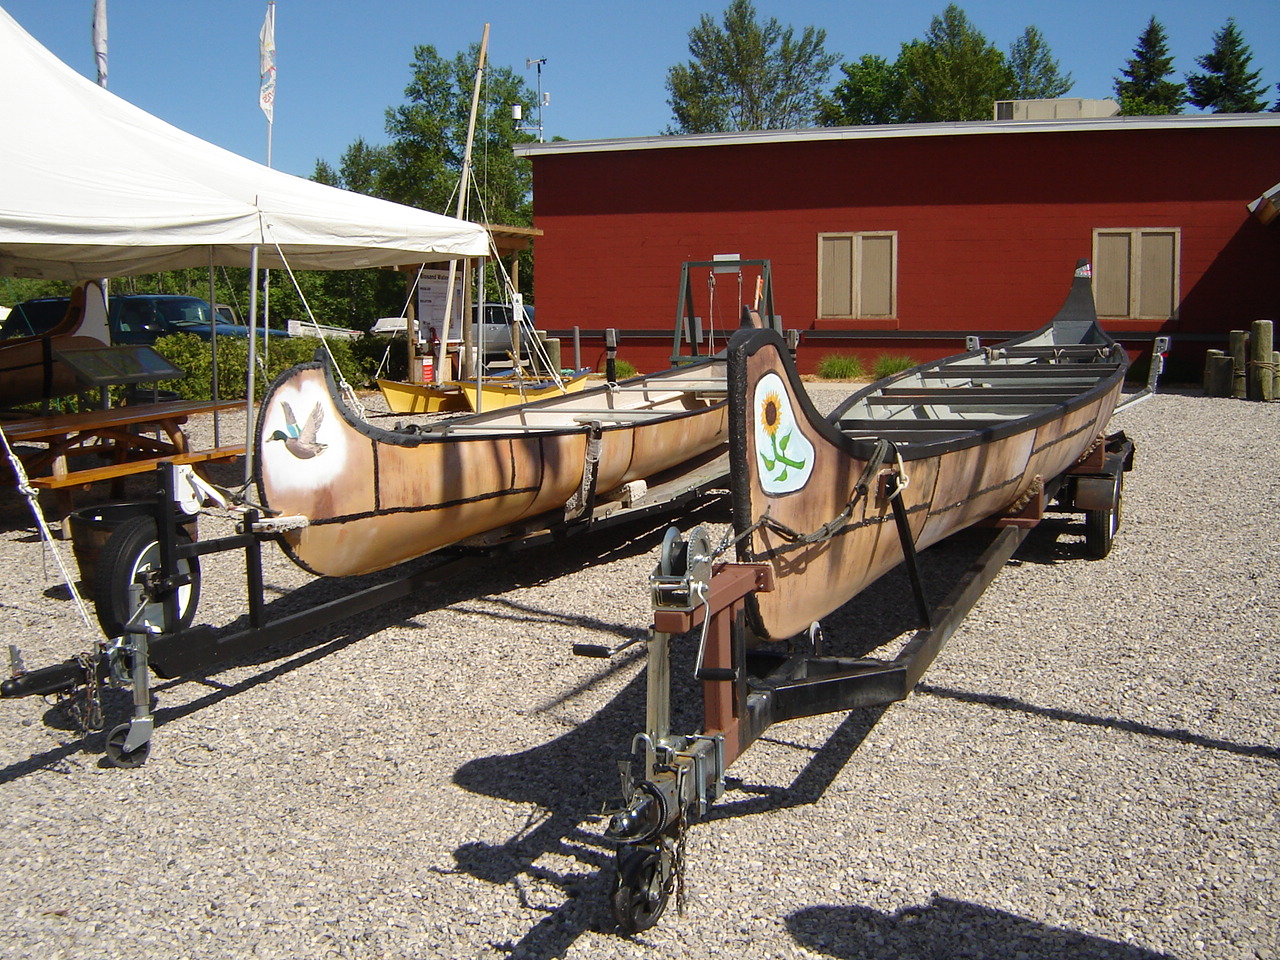 Traditional canoes at the Maritime Heritage Alliance Boatbuilding Workshops